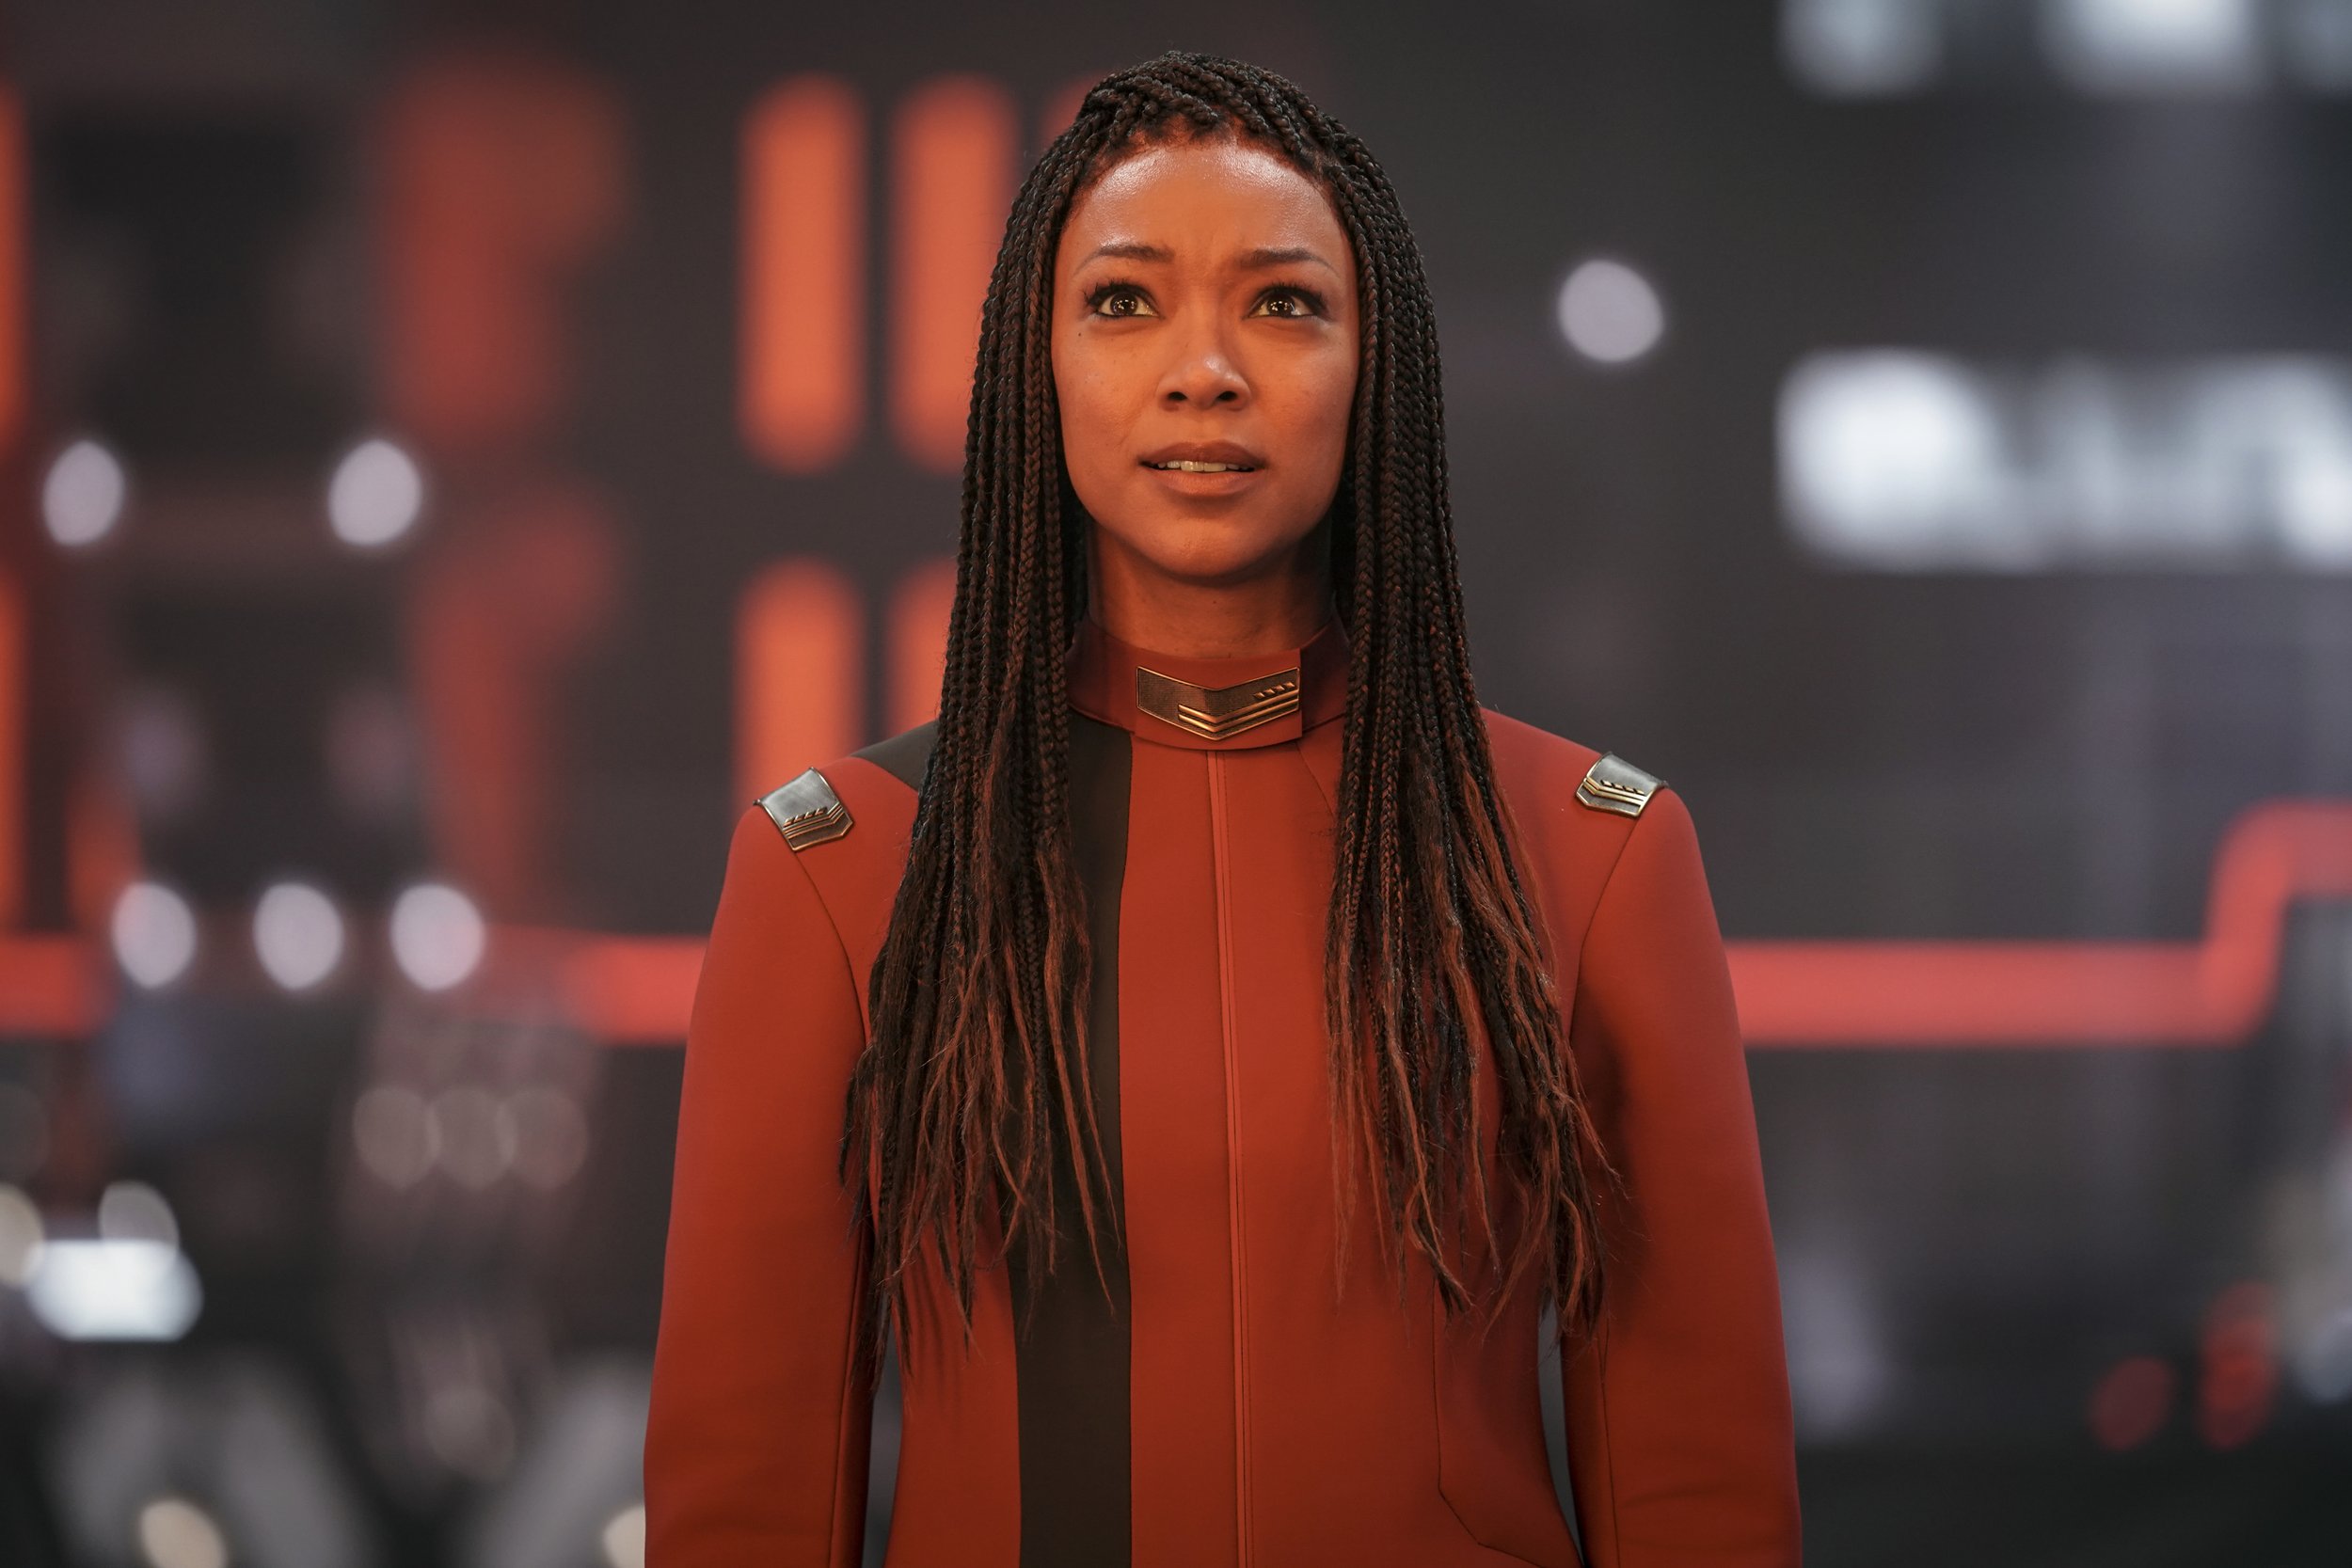   Pictured: Sonequa Martin-Green as Burnham of the Paramount+ original series STAR TREK: DISCOVERY. Photo Cr: Marni Grossman/Paramount+ © 2021 CBS Interactive. All Rights Reserved.  